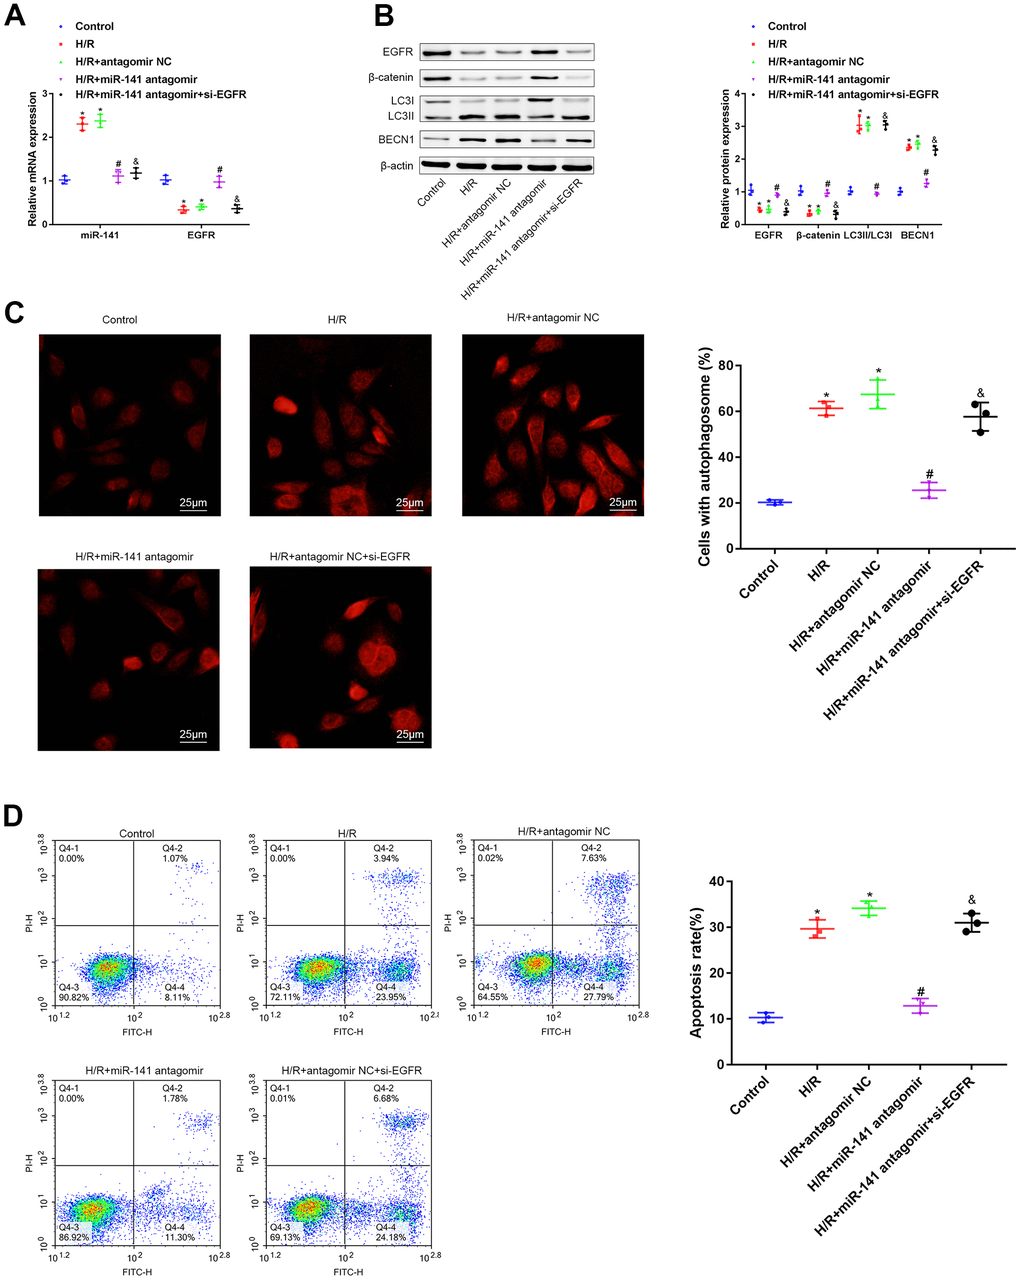 miR-141/EFGR/β-catenin axis gives rise to autophagy, contributing to the progression of H/R-induced injury in vitro. (A) miR-141 and EGFR expression in mouse PMVECs was measured by RT-qPCR. (B) EGFR, β-catenin, LC3II/I and BECN1 expression in mouse PMVECs were measured by Western blot analysis. (C) LC3 immunofluorescence assay (× 400) was used to detect autophagosomes of PMVECs. (D) the apoptosis rate of PMVECs was measured by flow cytometry assay. * p 